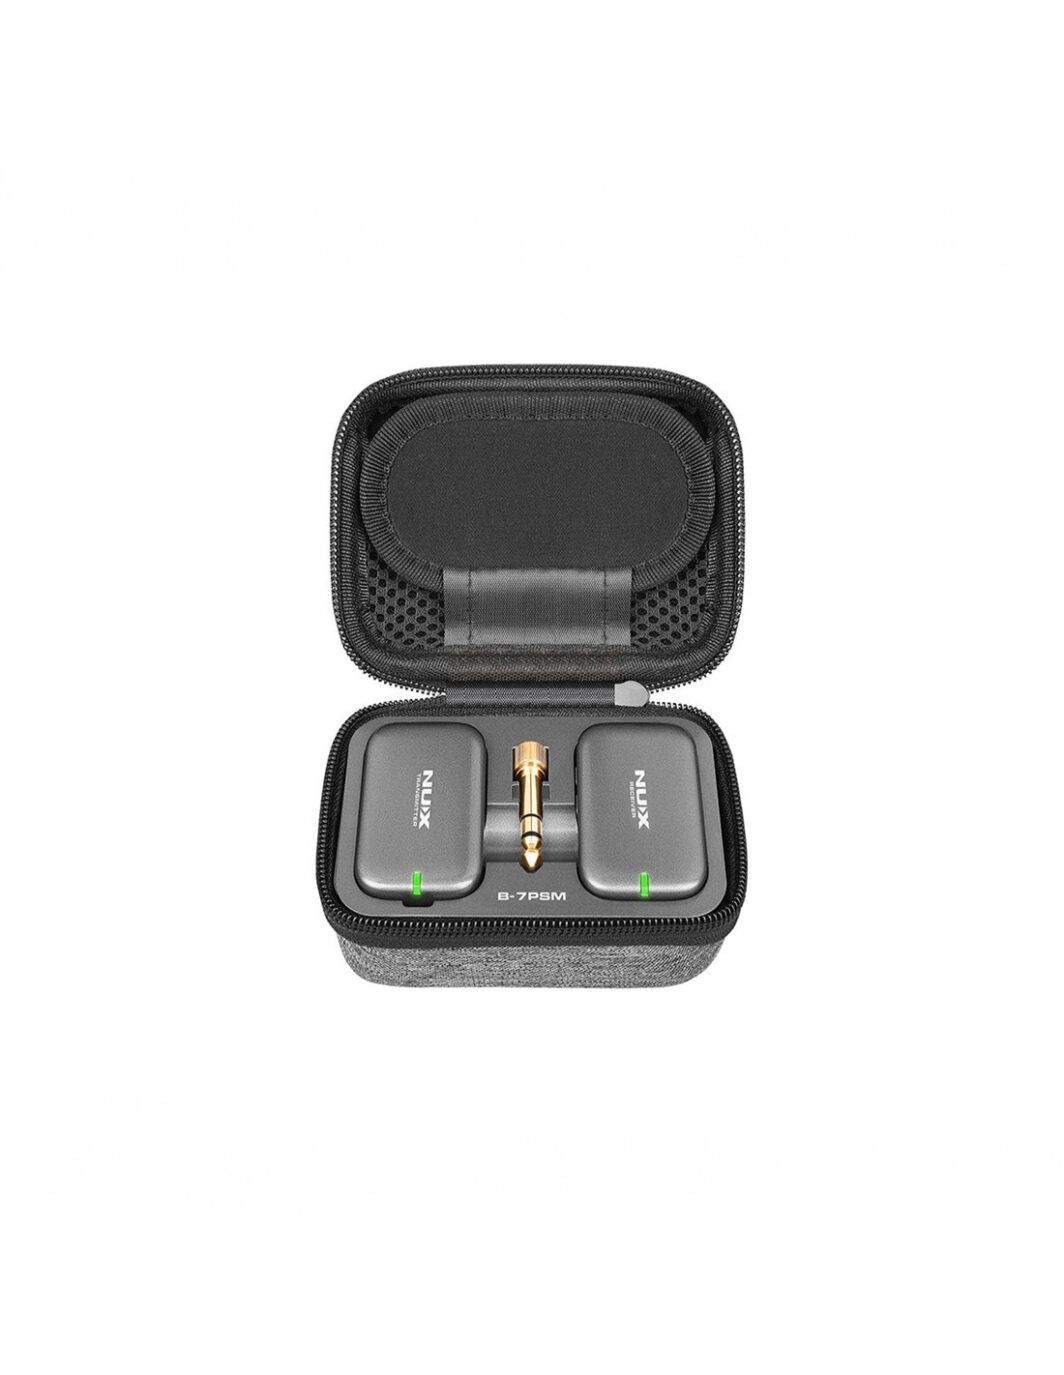 NUX Wireless System IN-EAR monitoring B-7 PSM